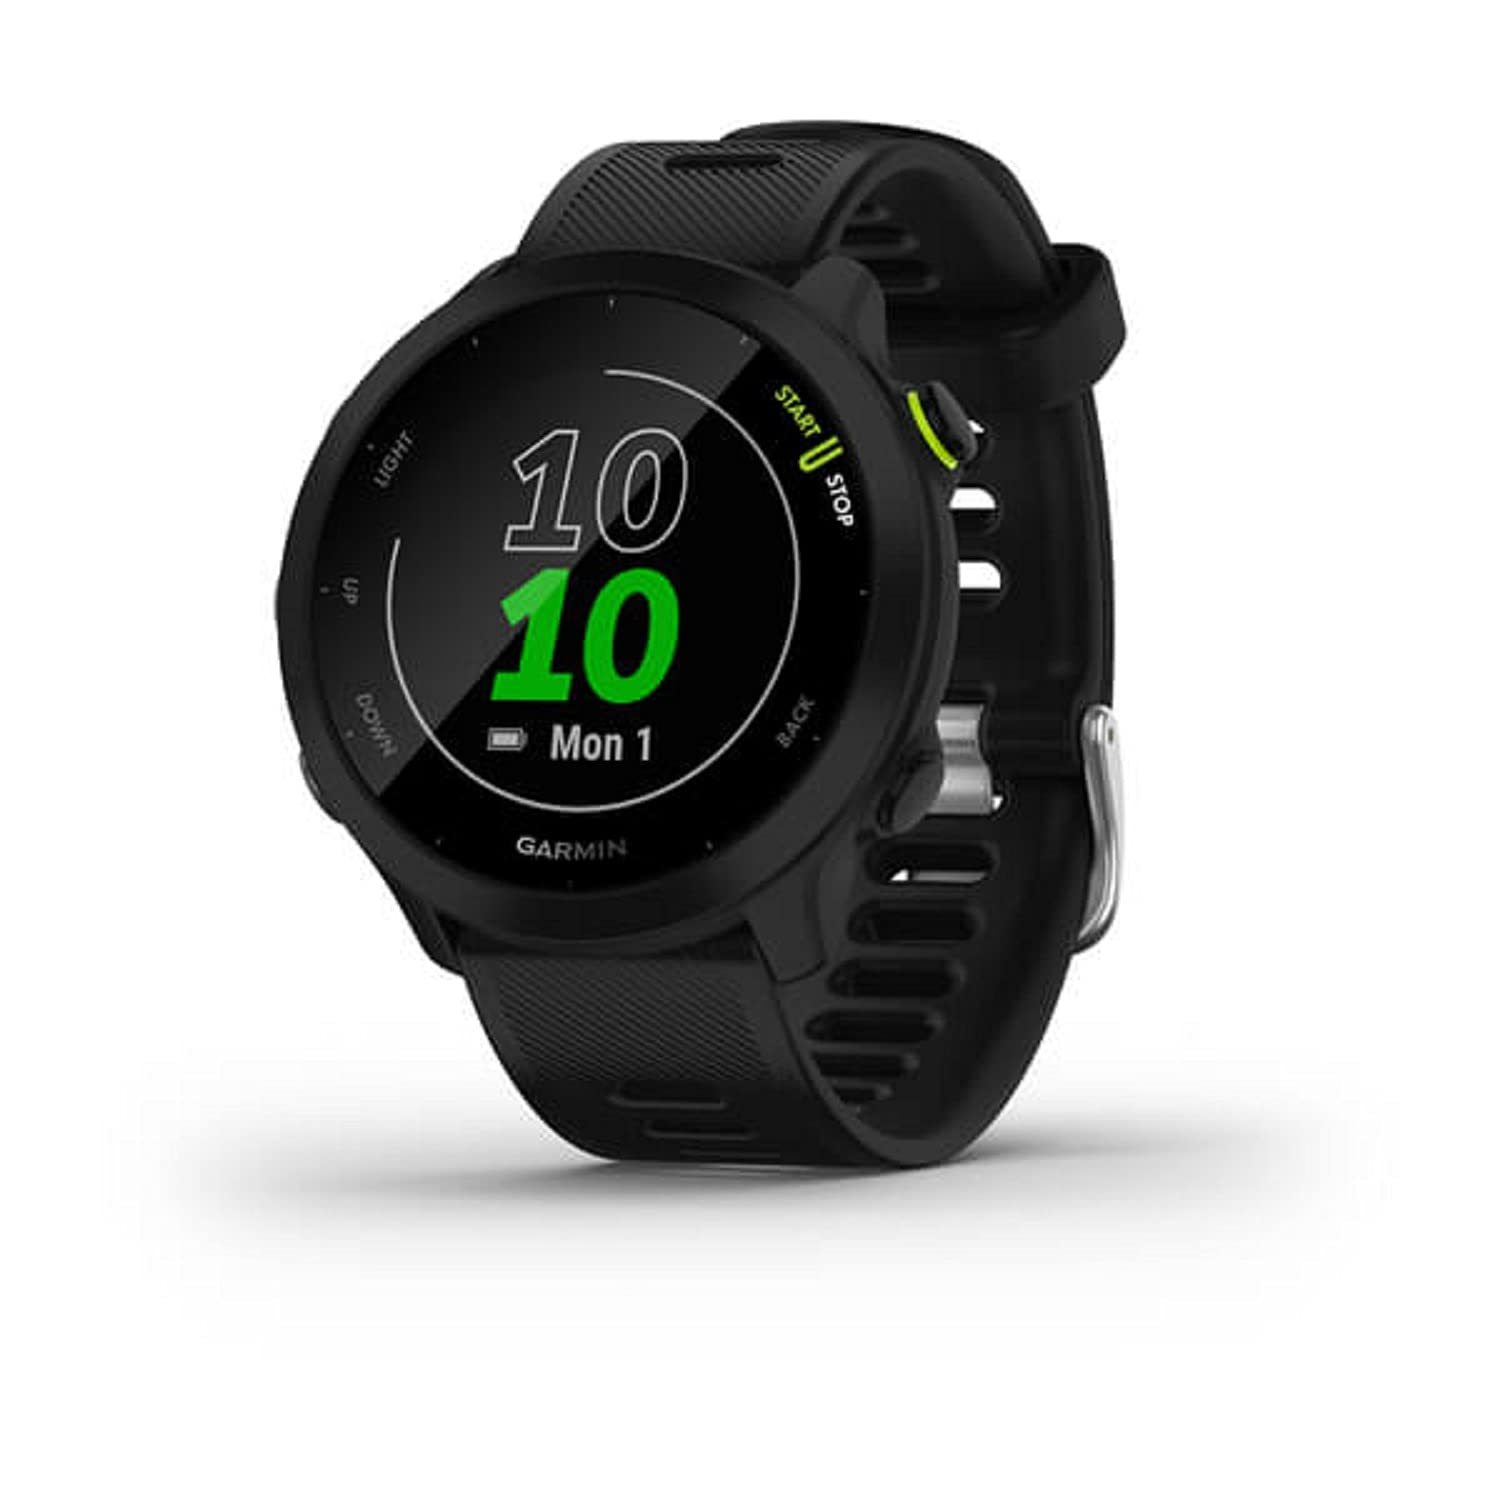 Garmin 010-02562-00 Forerunner 55, GPS Running Watch with Daily Suggested Workou - $265.04